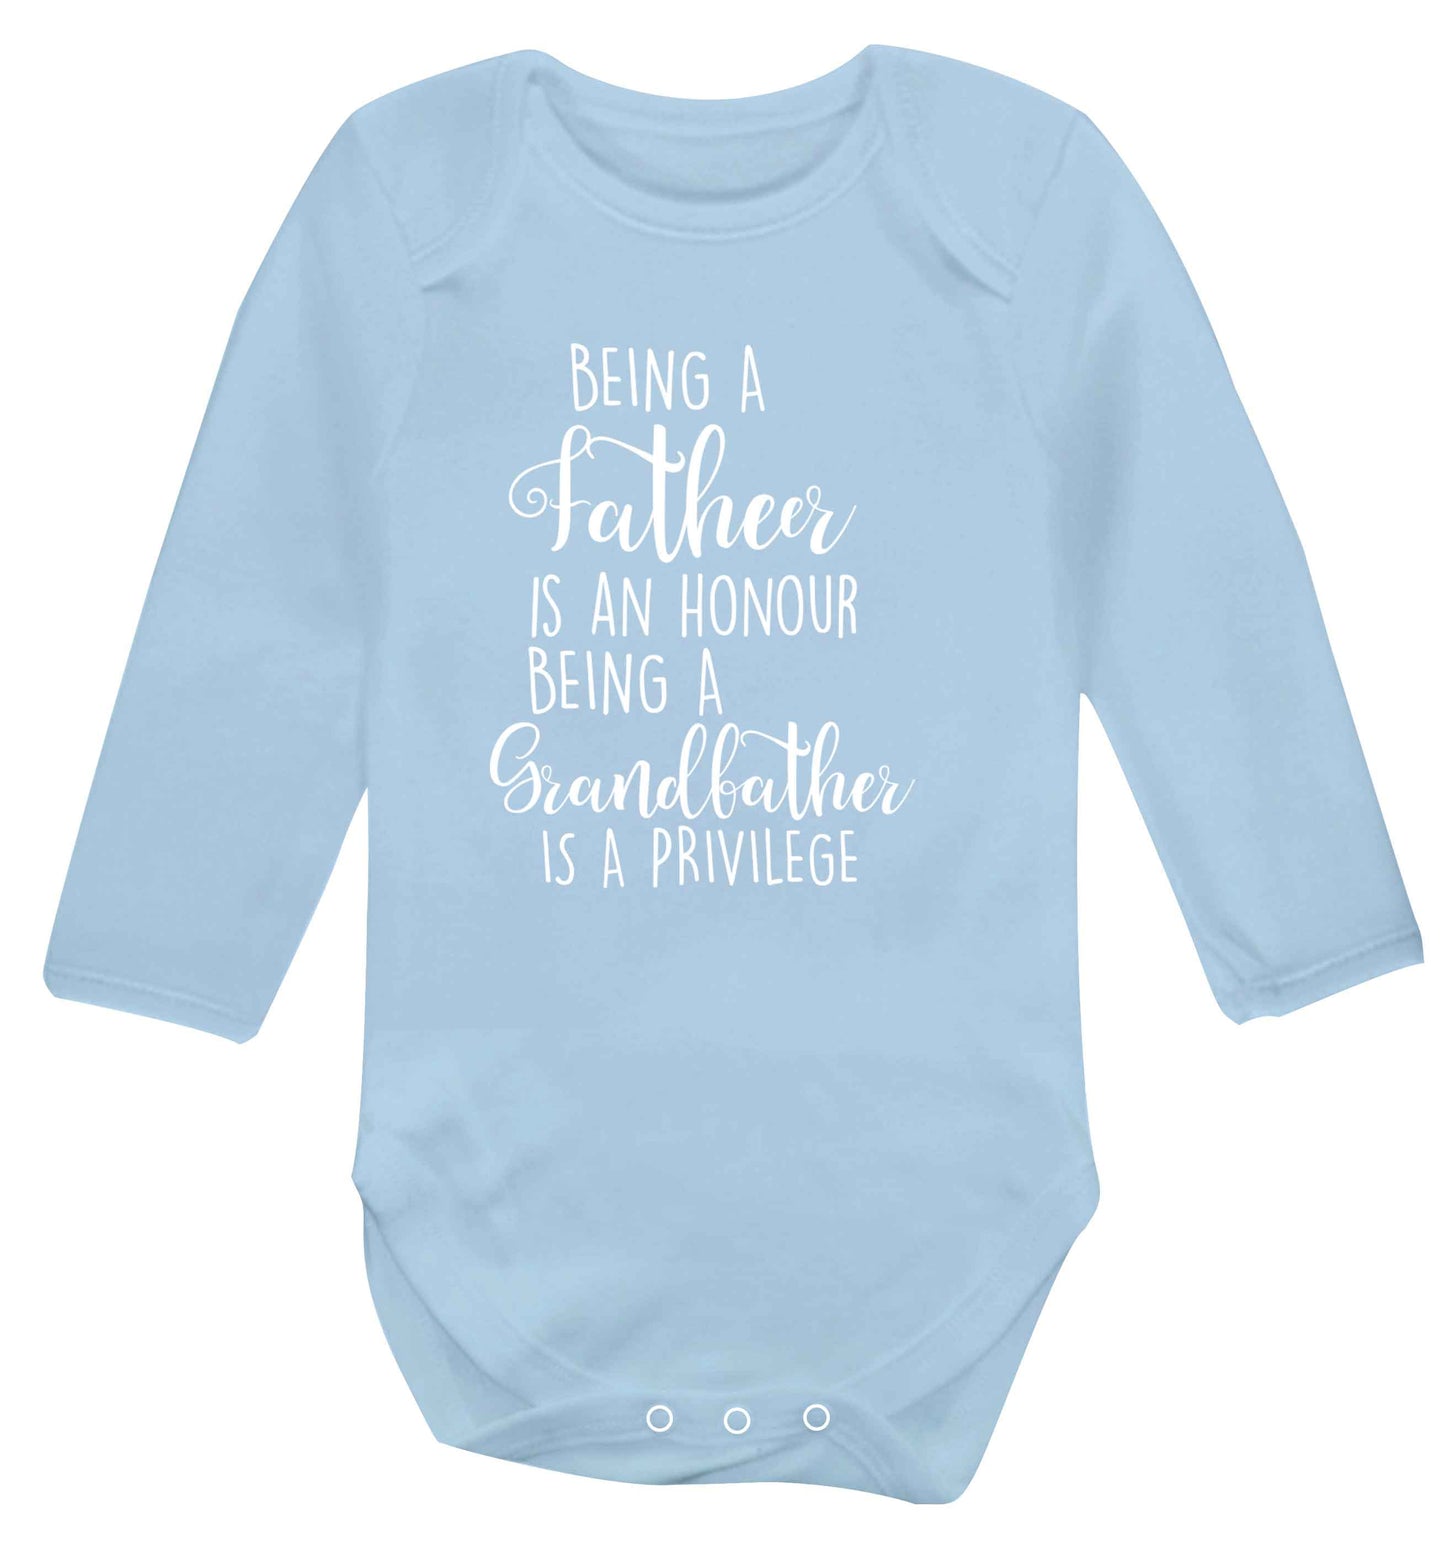 Being a father is an honour being a grandfather is a privilege Baby Vest long sleeved pale blue 6-12 months